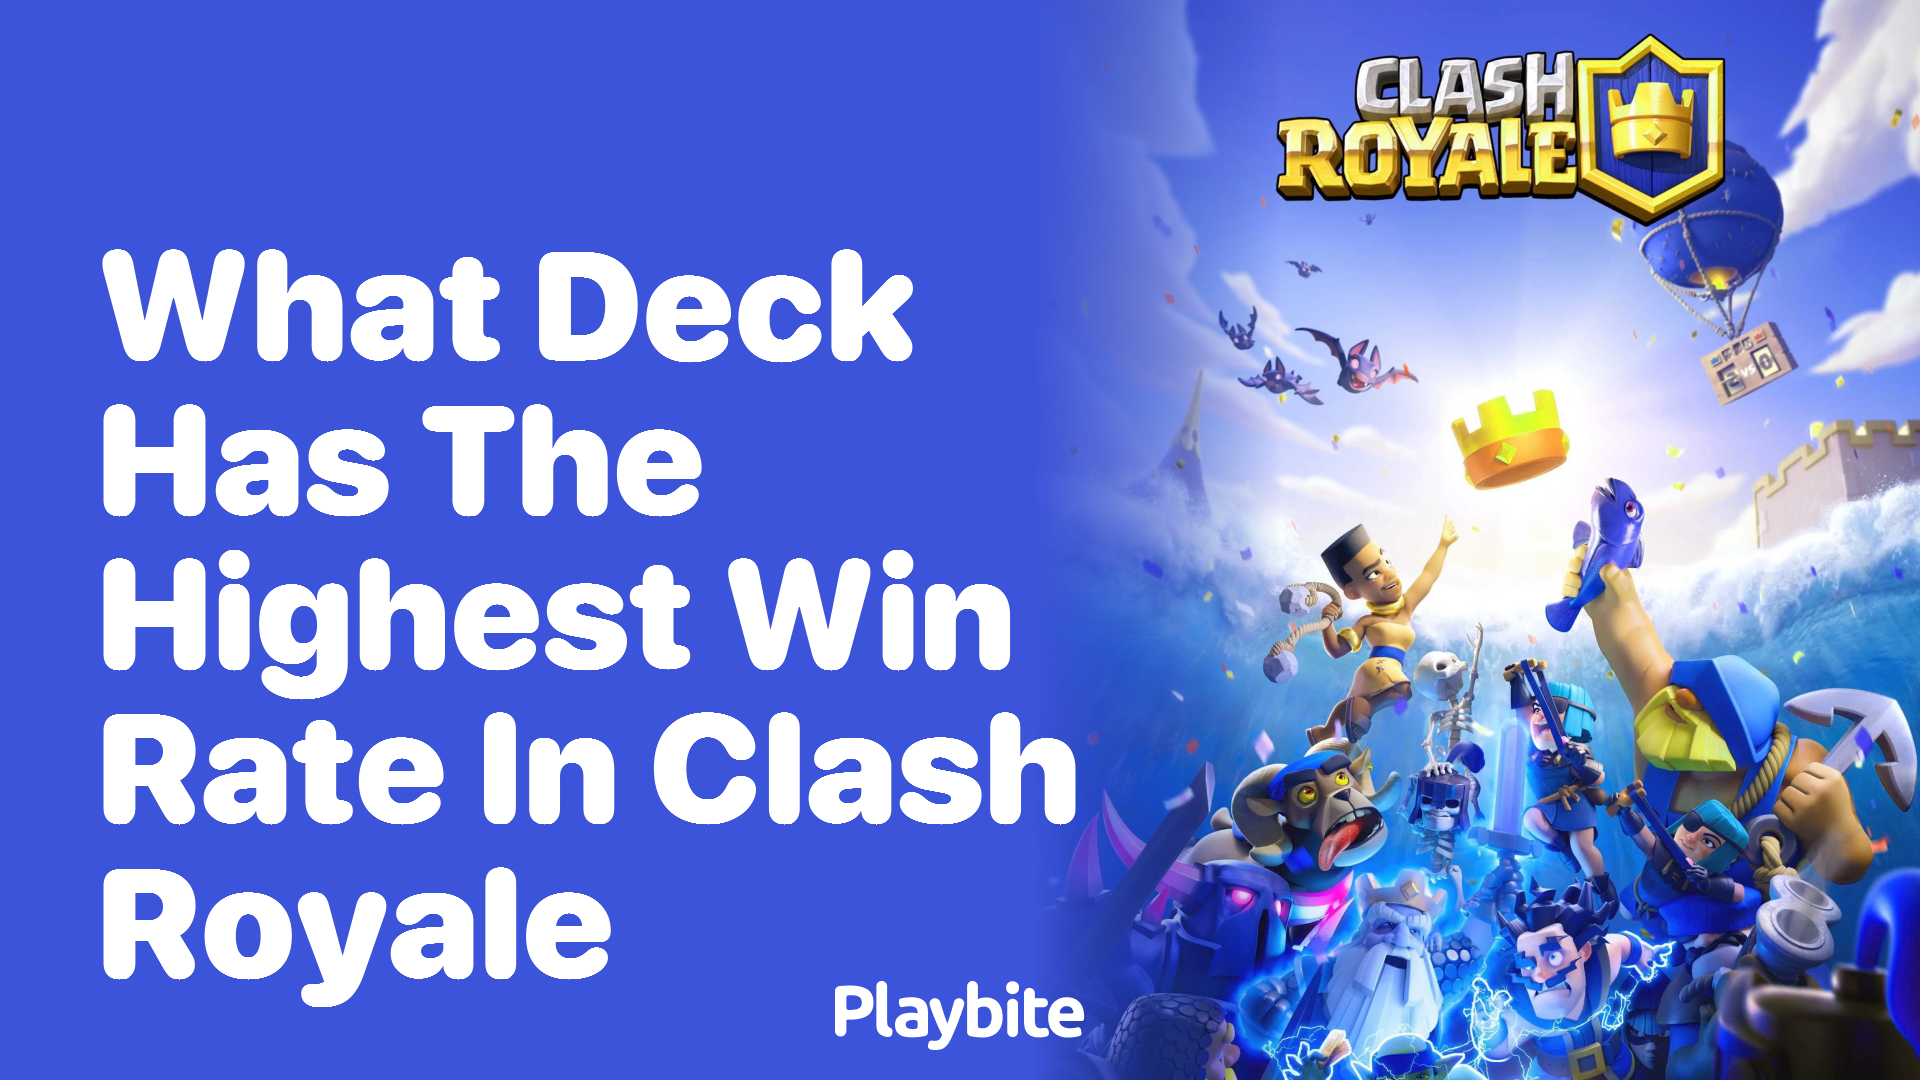 What Deck Has the Highest Win Rate in Clash Royale?